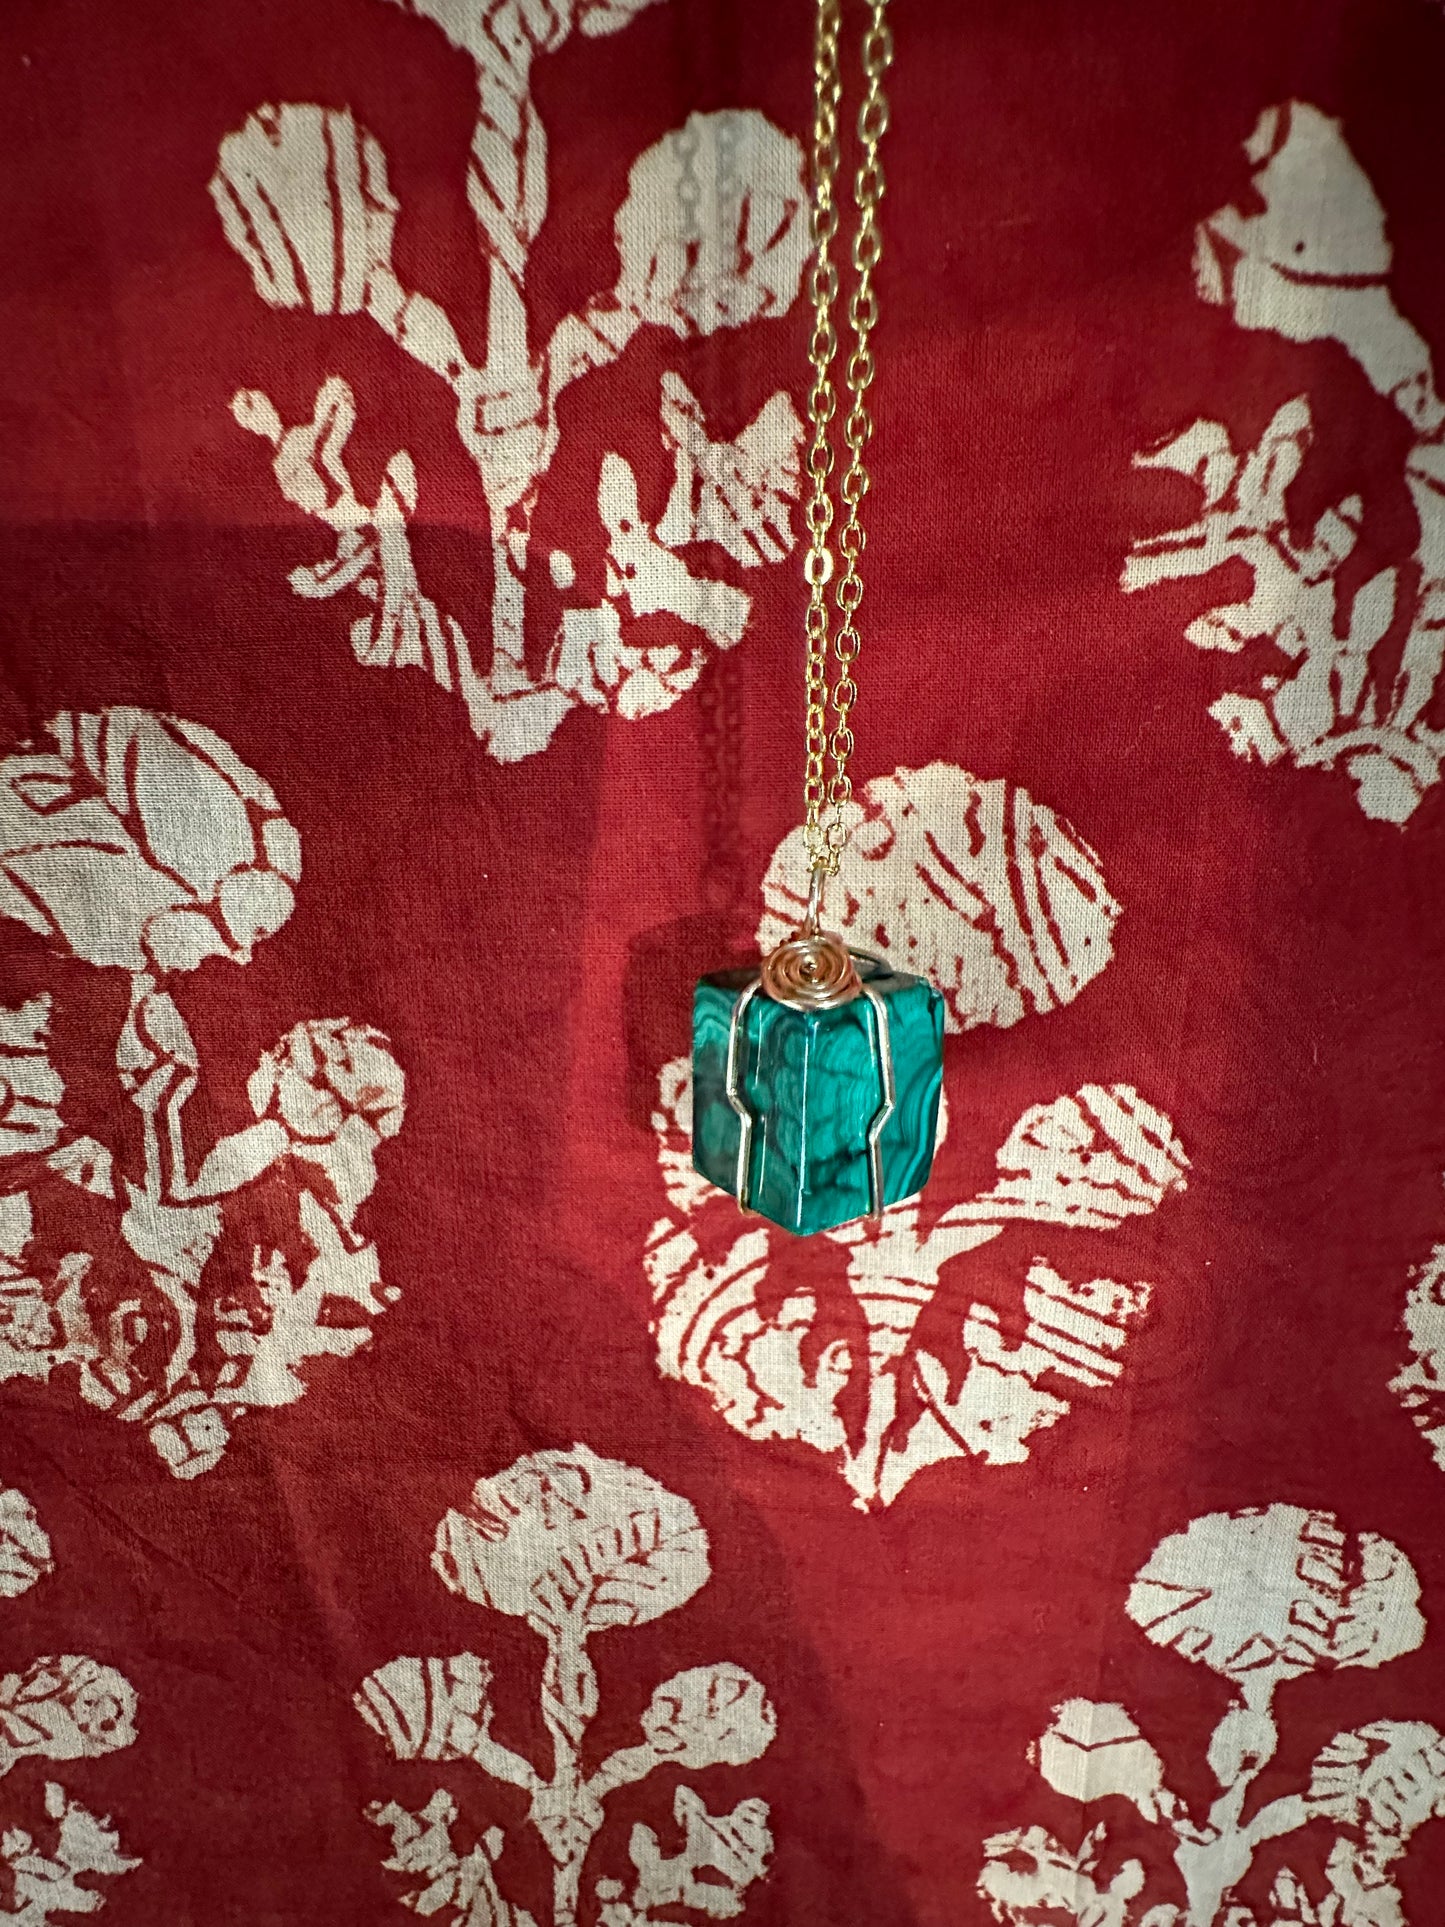 ADORNMENTS- Malachite Pendants- Handwrapped Crystal Necklaces